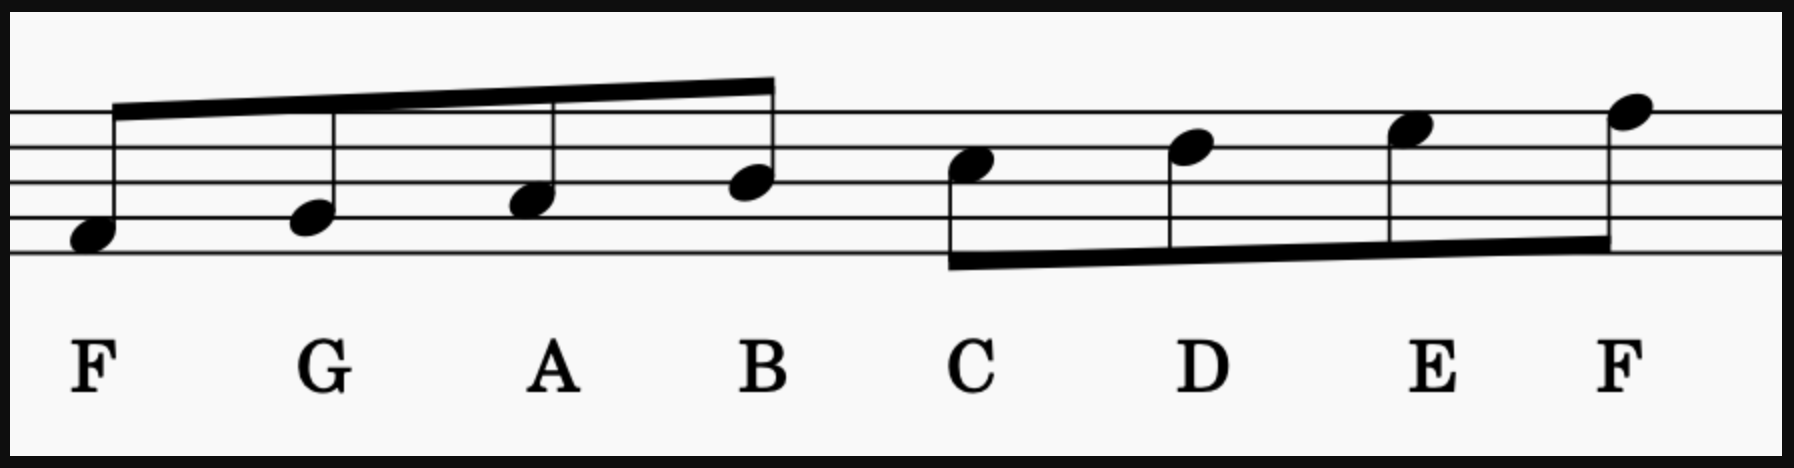 Modes: F lydian scale